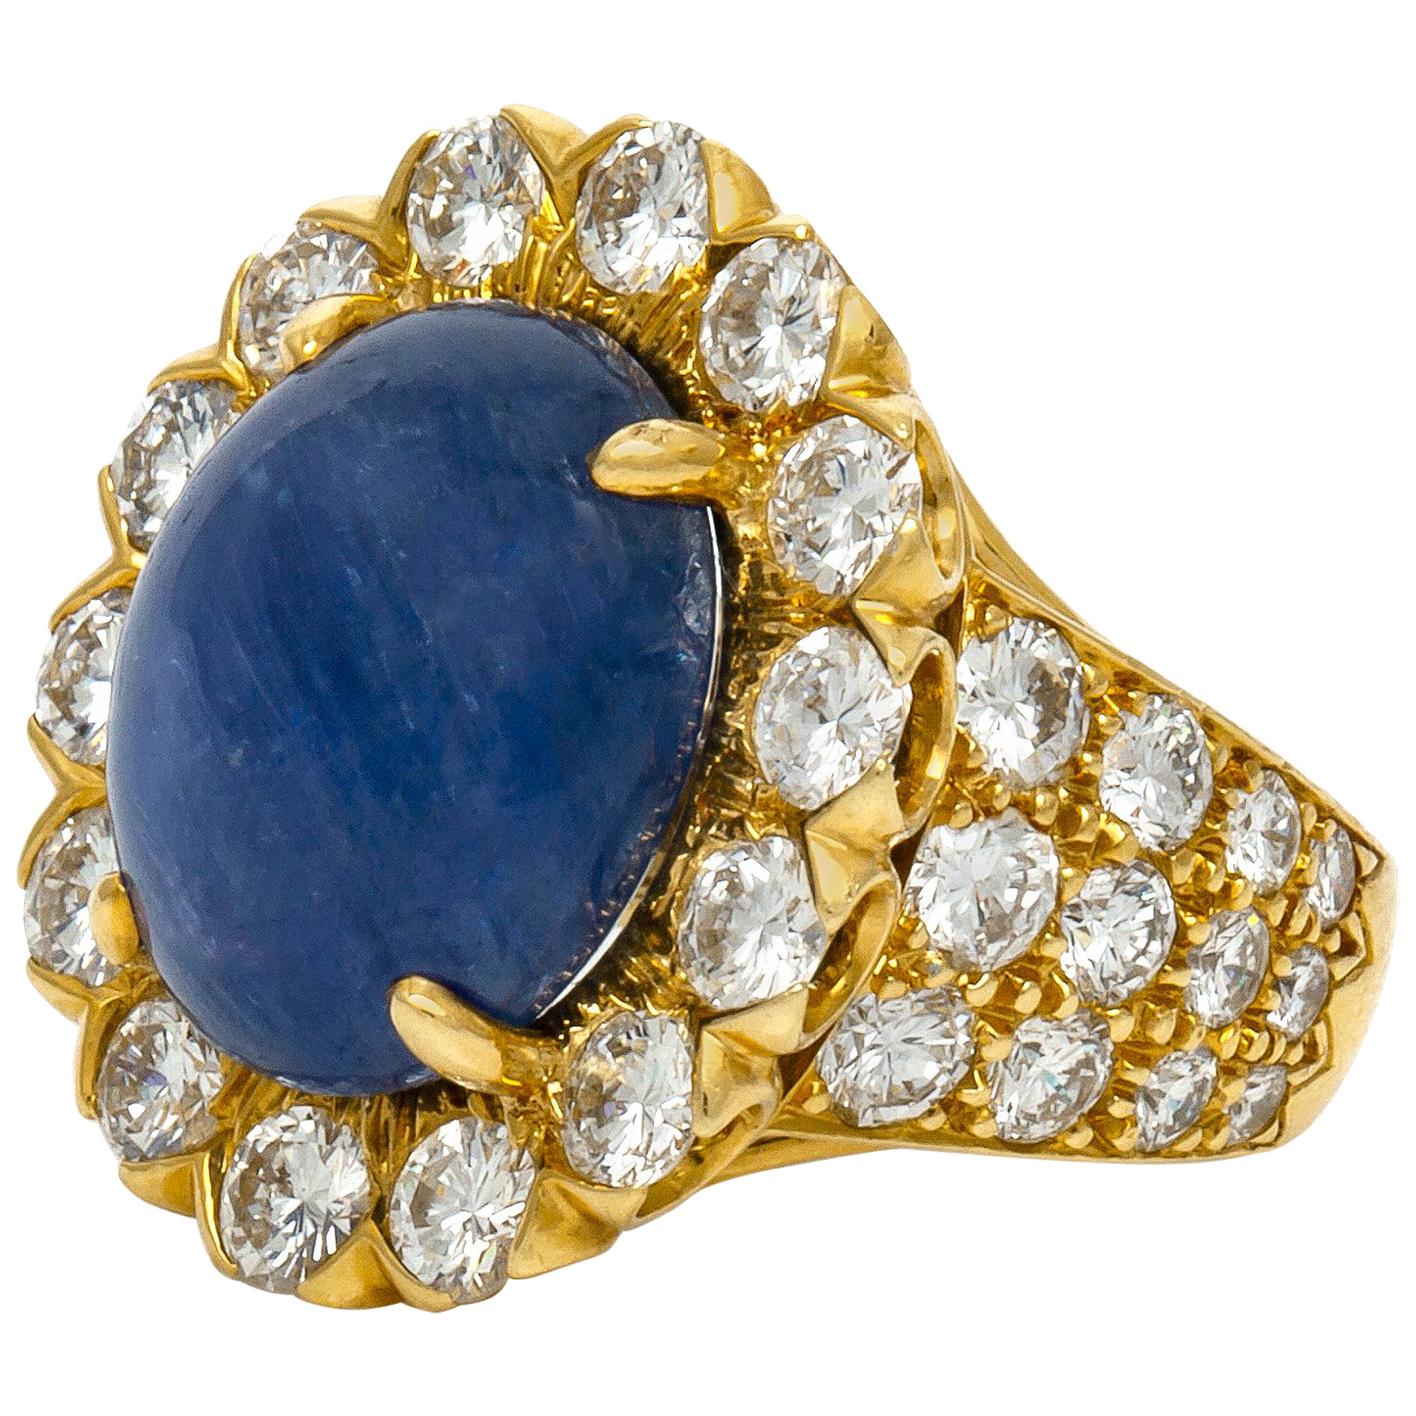 Finely crafted in 18k yellow and white gold with a Cabochon Sapphire weighing approximately 10.00 carats.
The ring features round brilliant cut diamonds weighingapproximately a total of 10.00 carats.
Signed by David Webb
Size 6, resizable
Circa 1970s